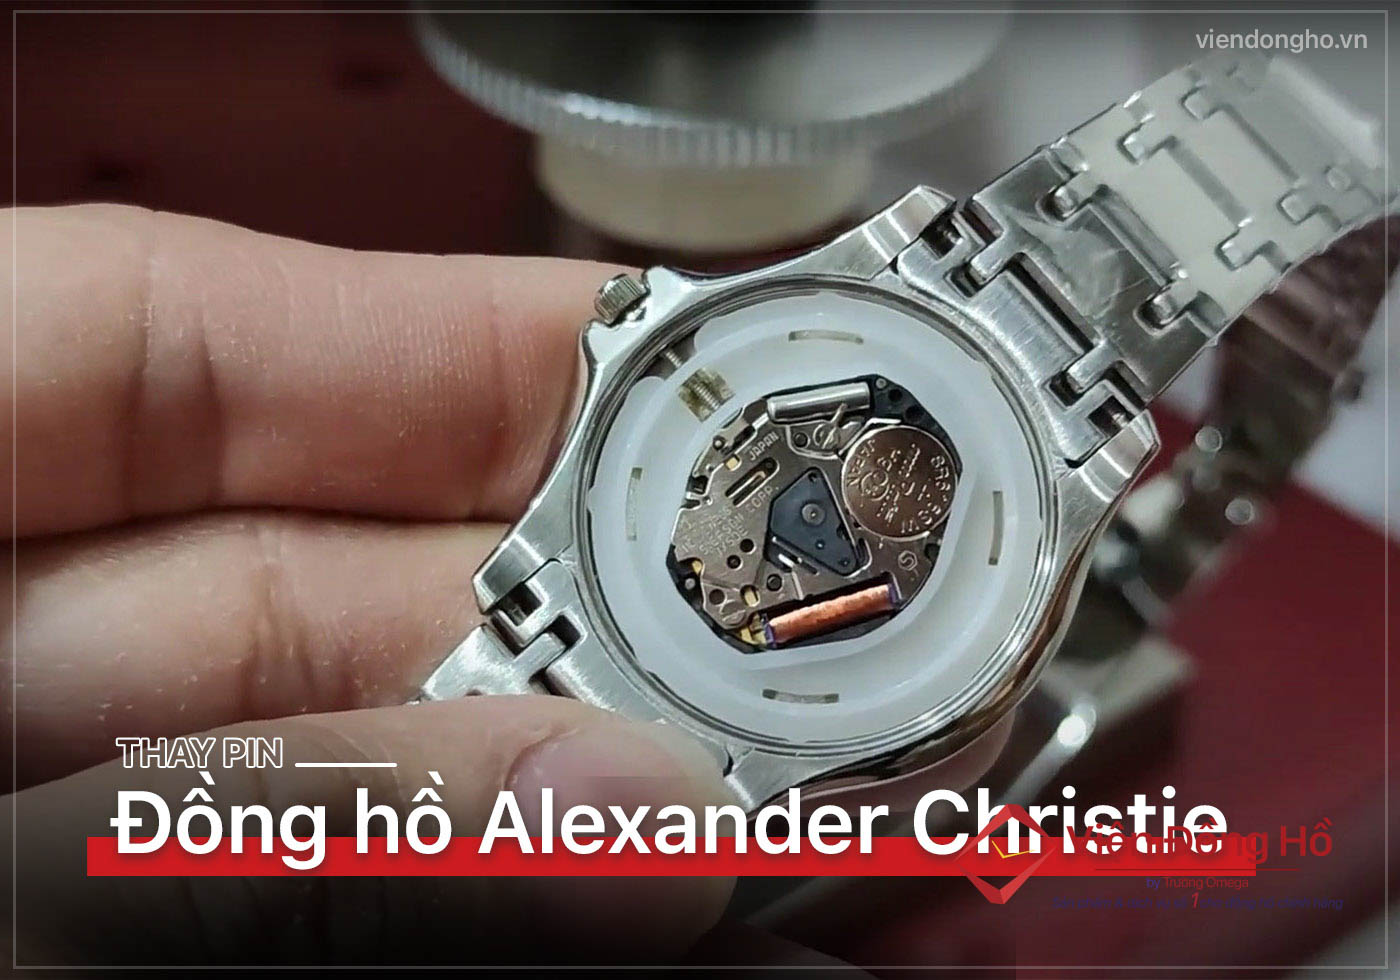 Thay pin dong ho Alexandre Christie 10